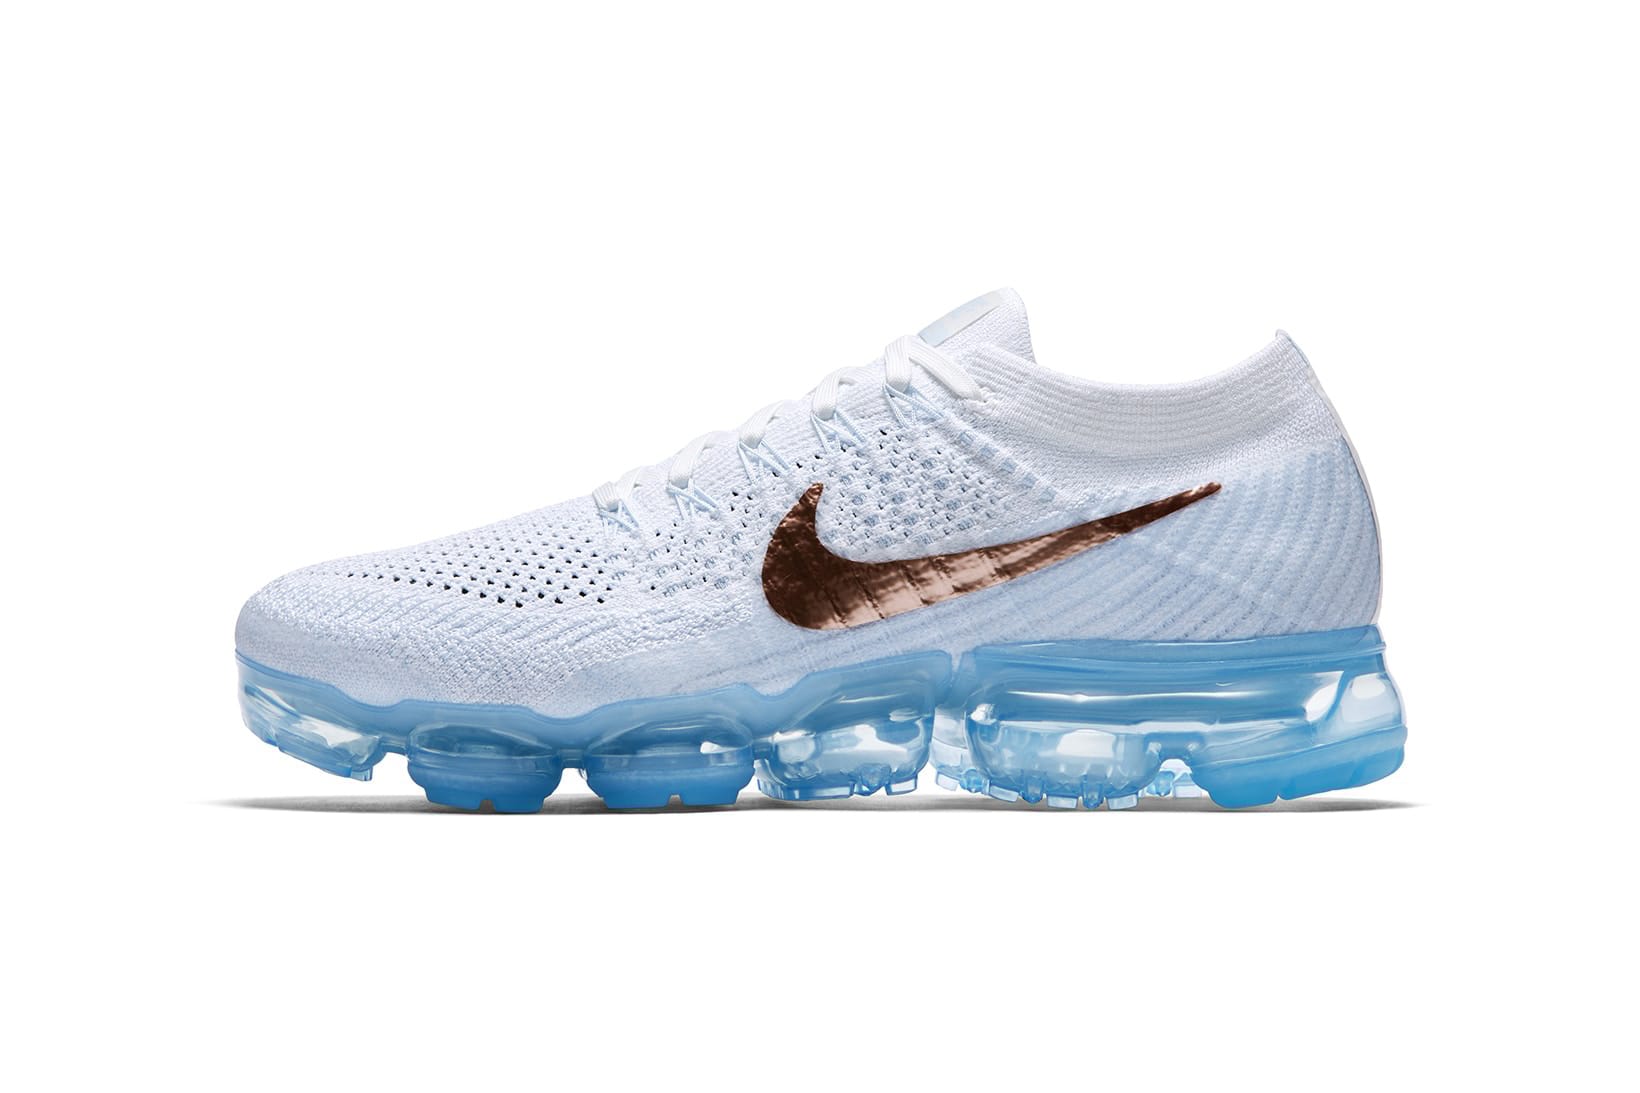 icy blue vapormax